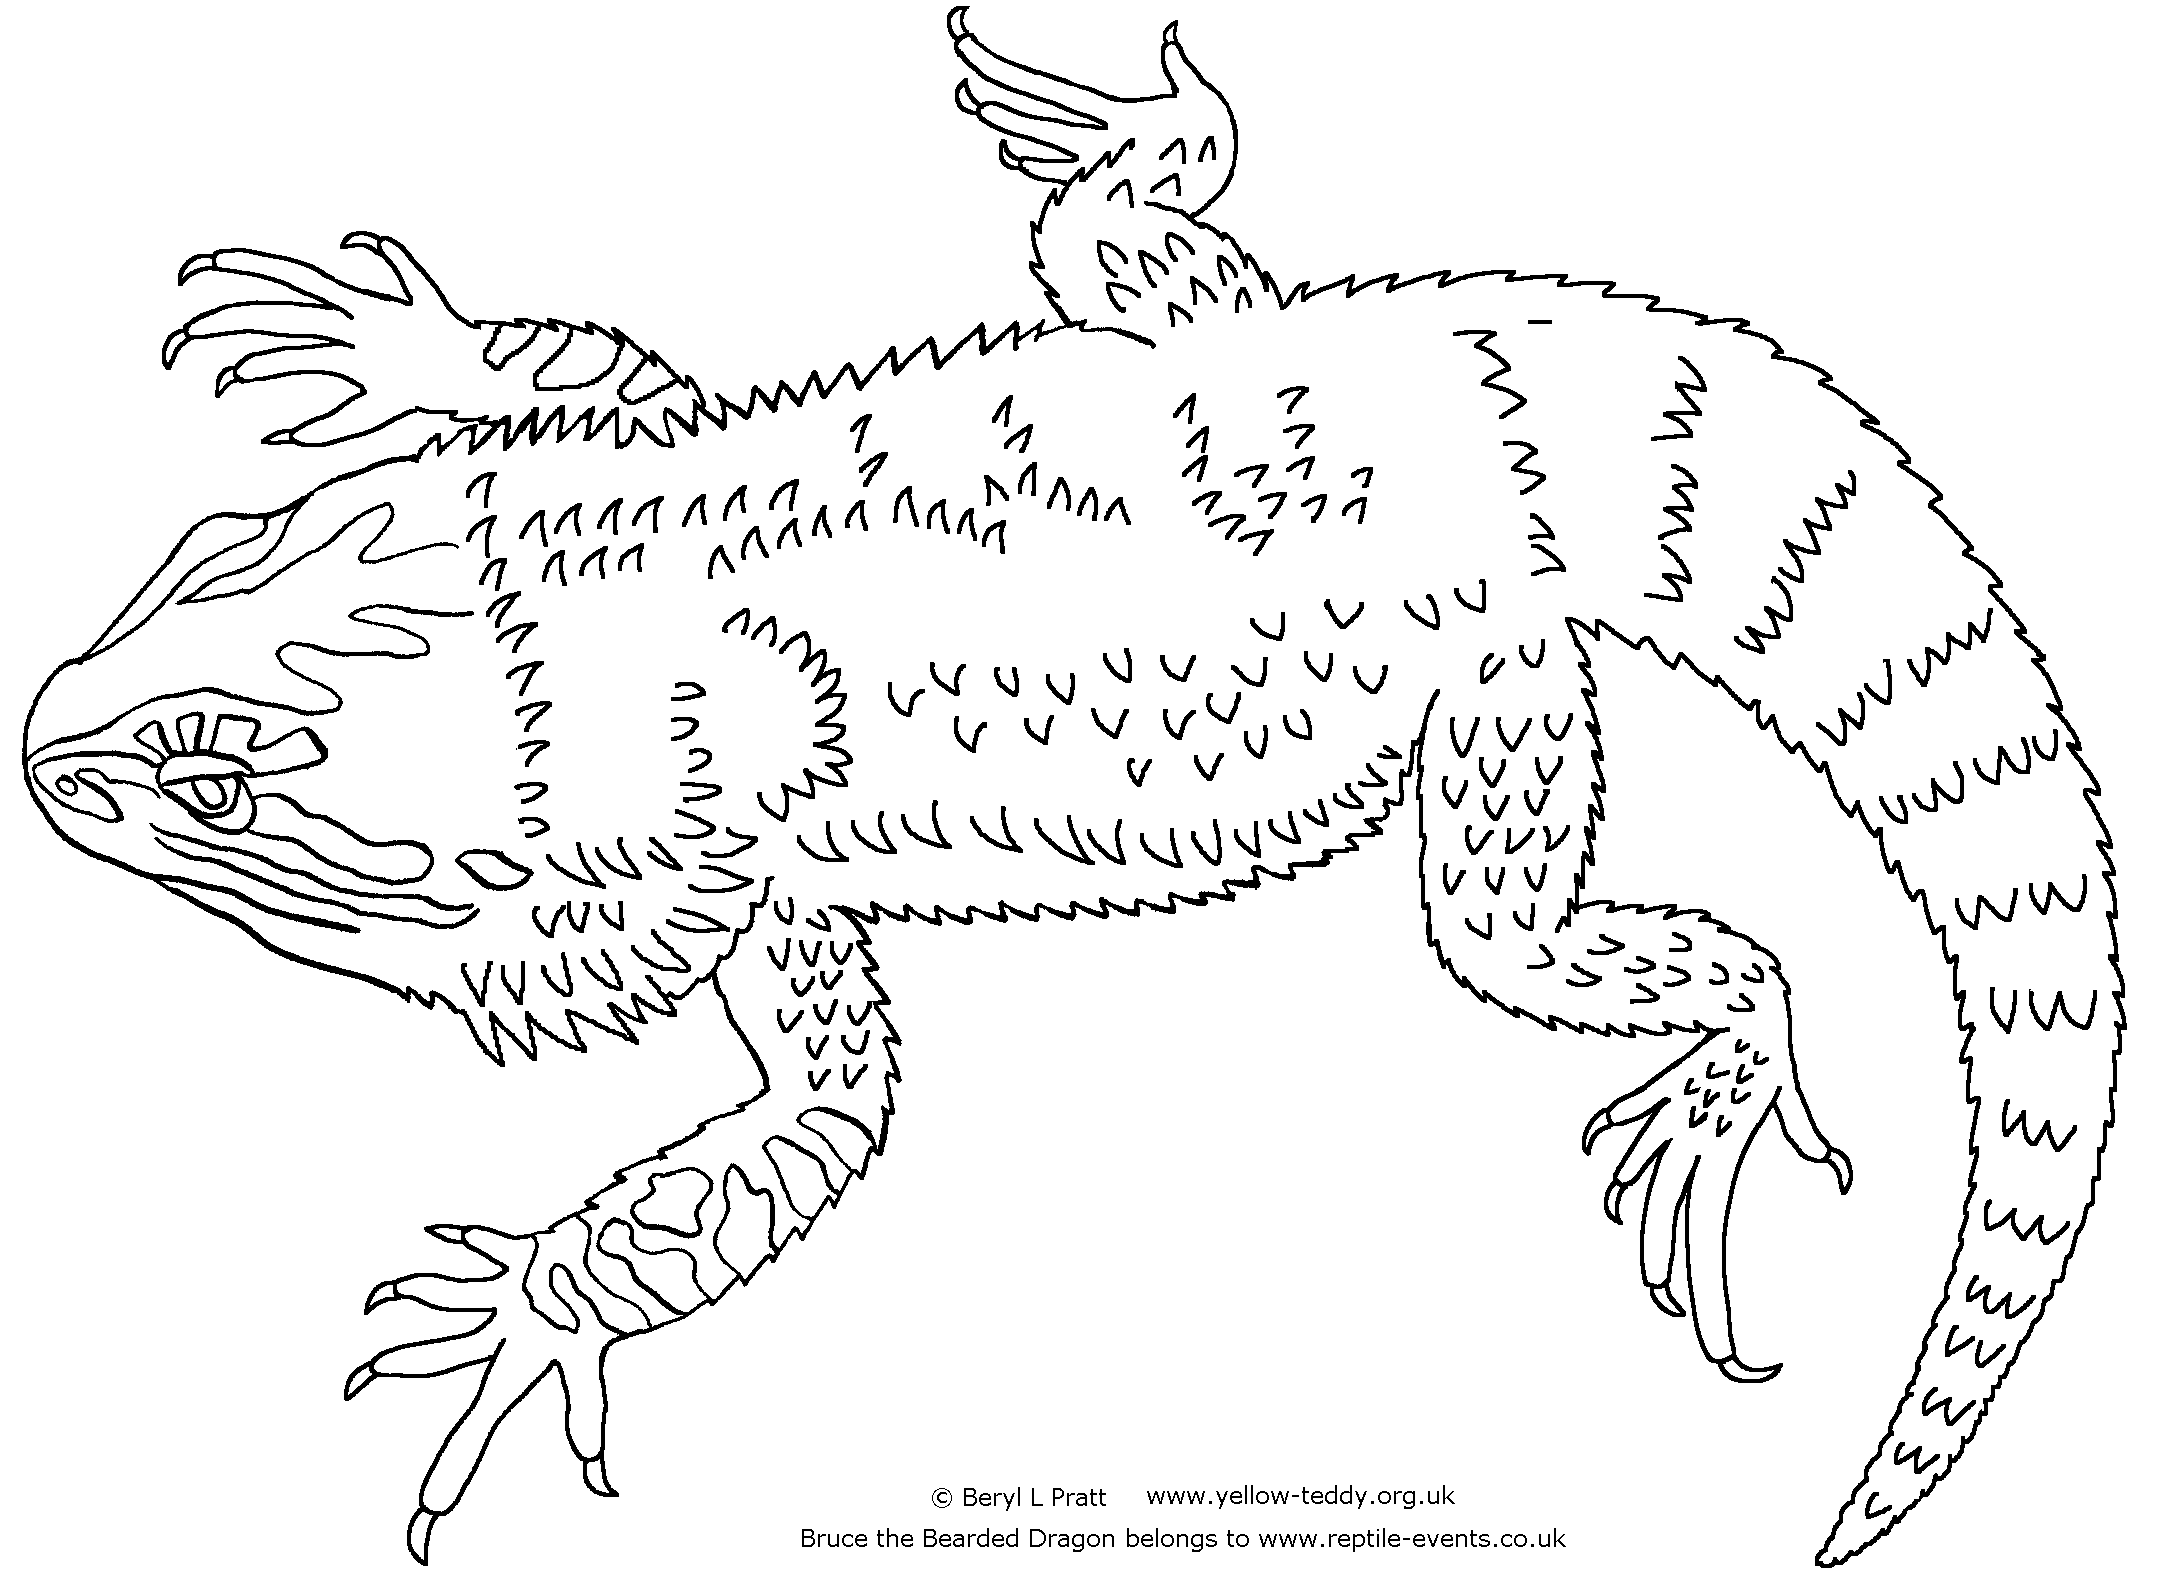 Line drawing of Bruce the Bearded Dragon